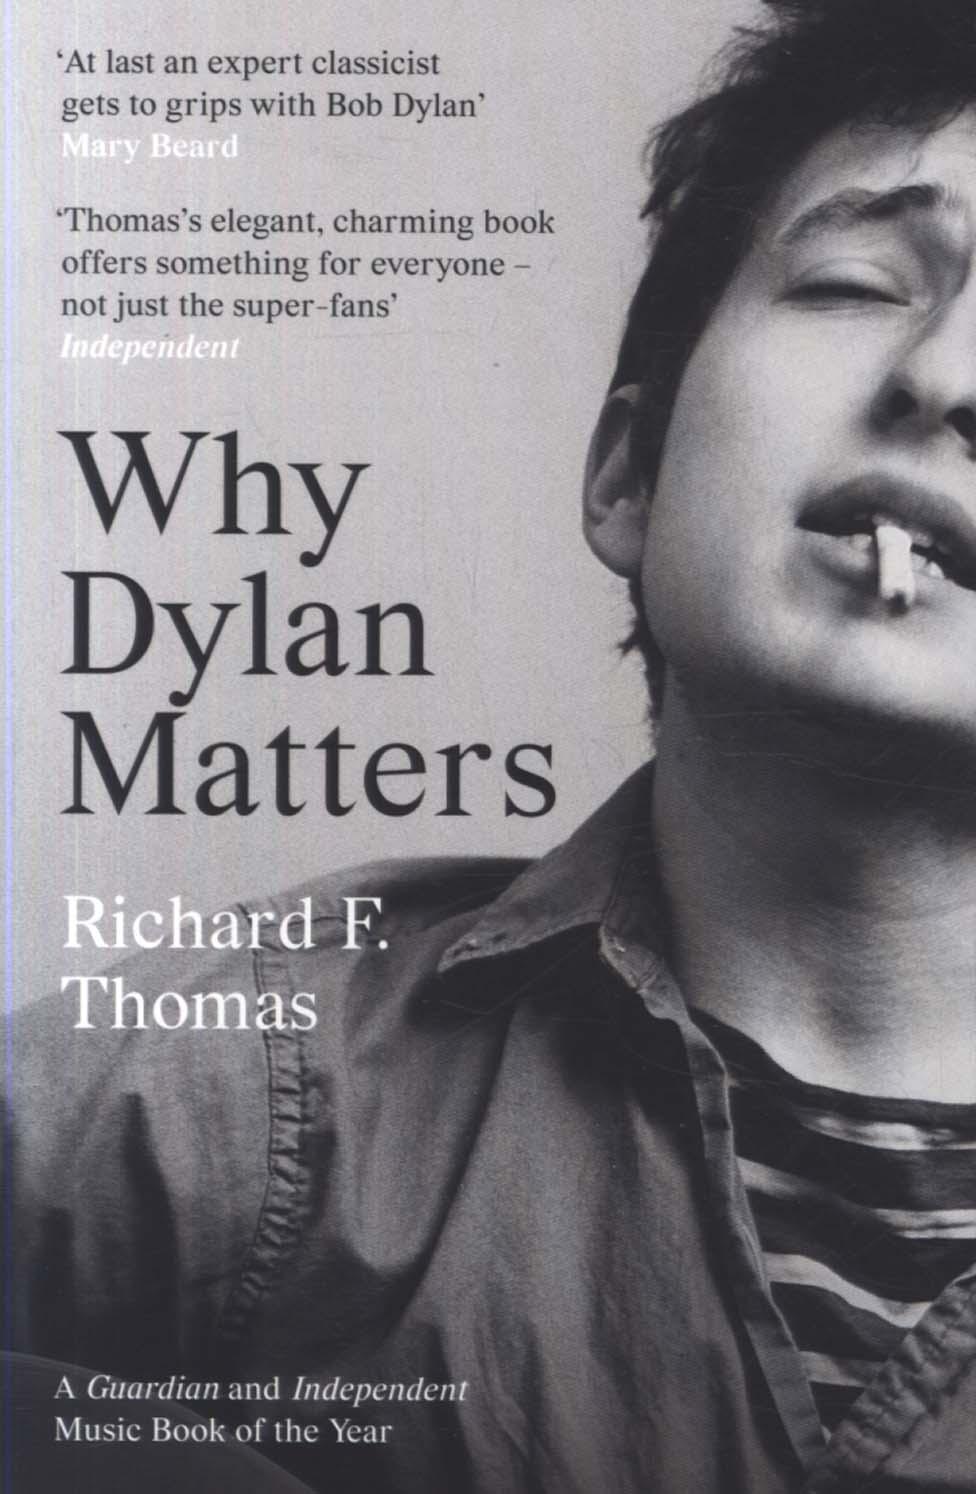 Why Dylan Matters